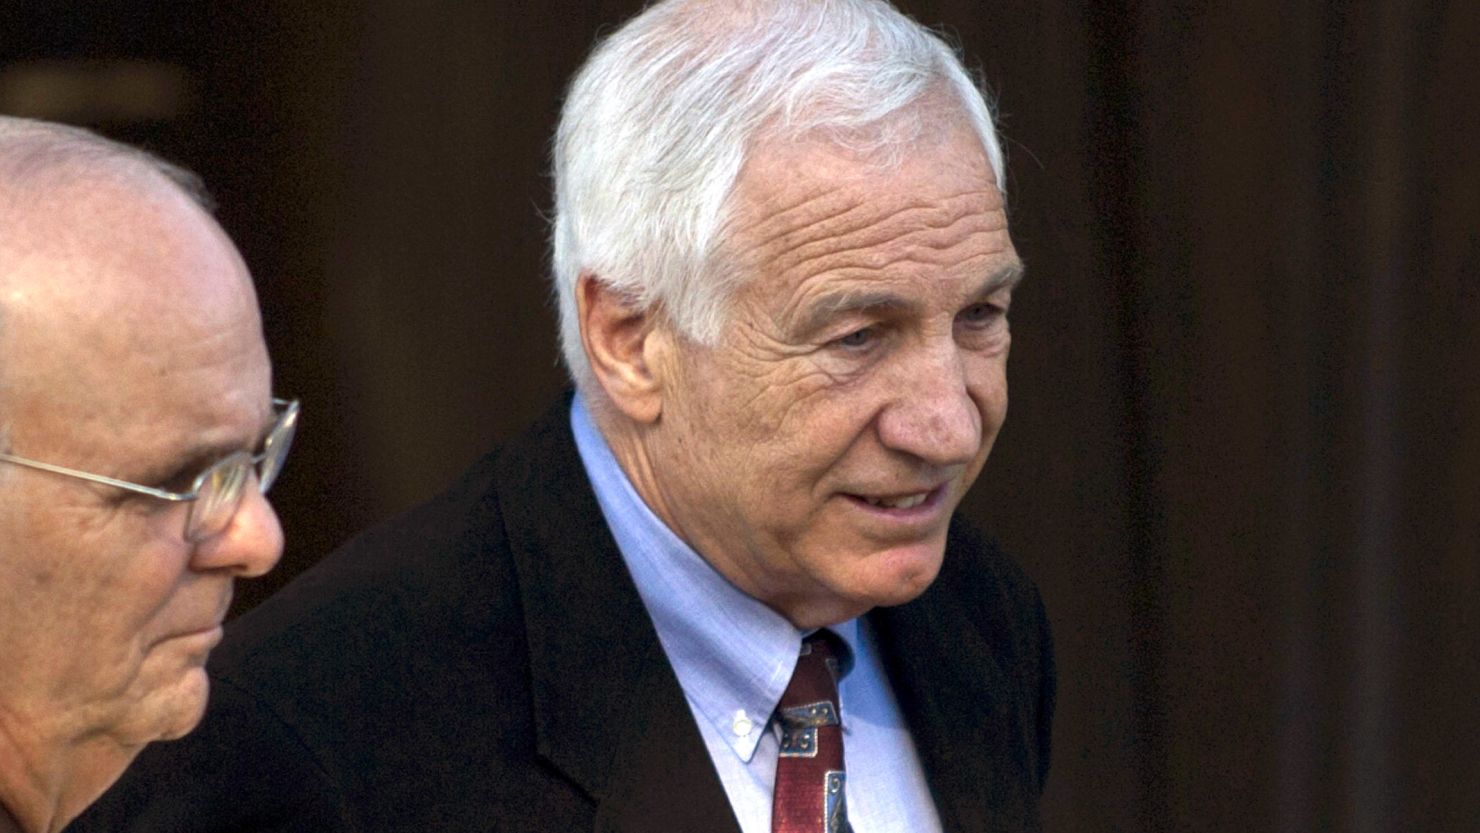 We tend to grant moral authority to college coaches like Jerry Sandusky, says Jay Jennings. 